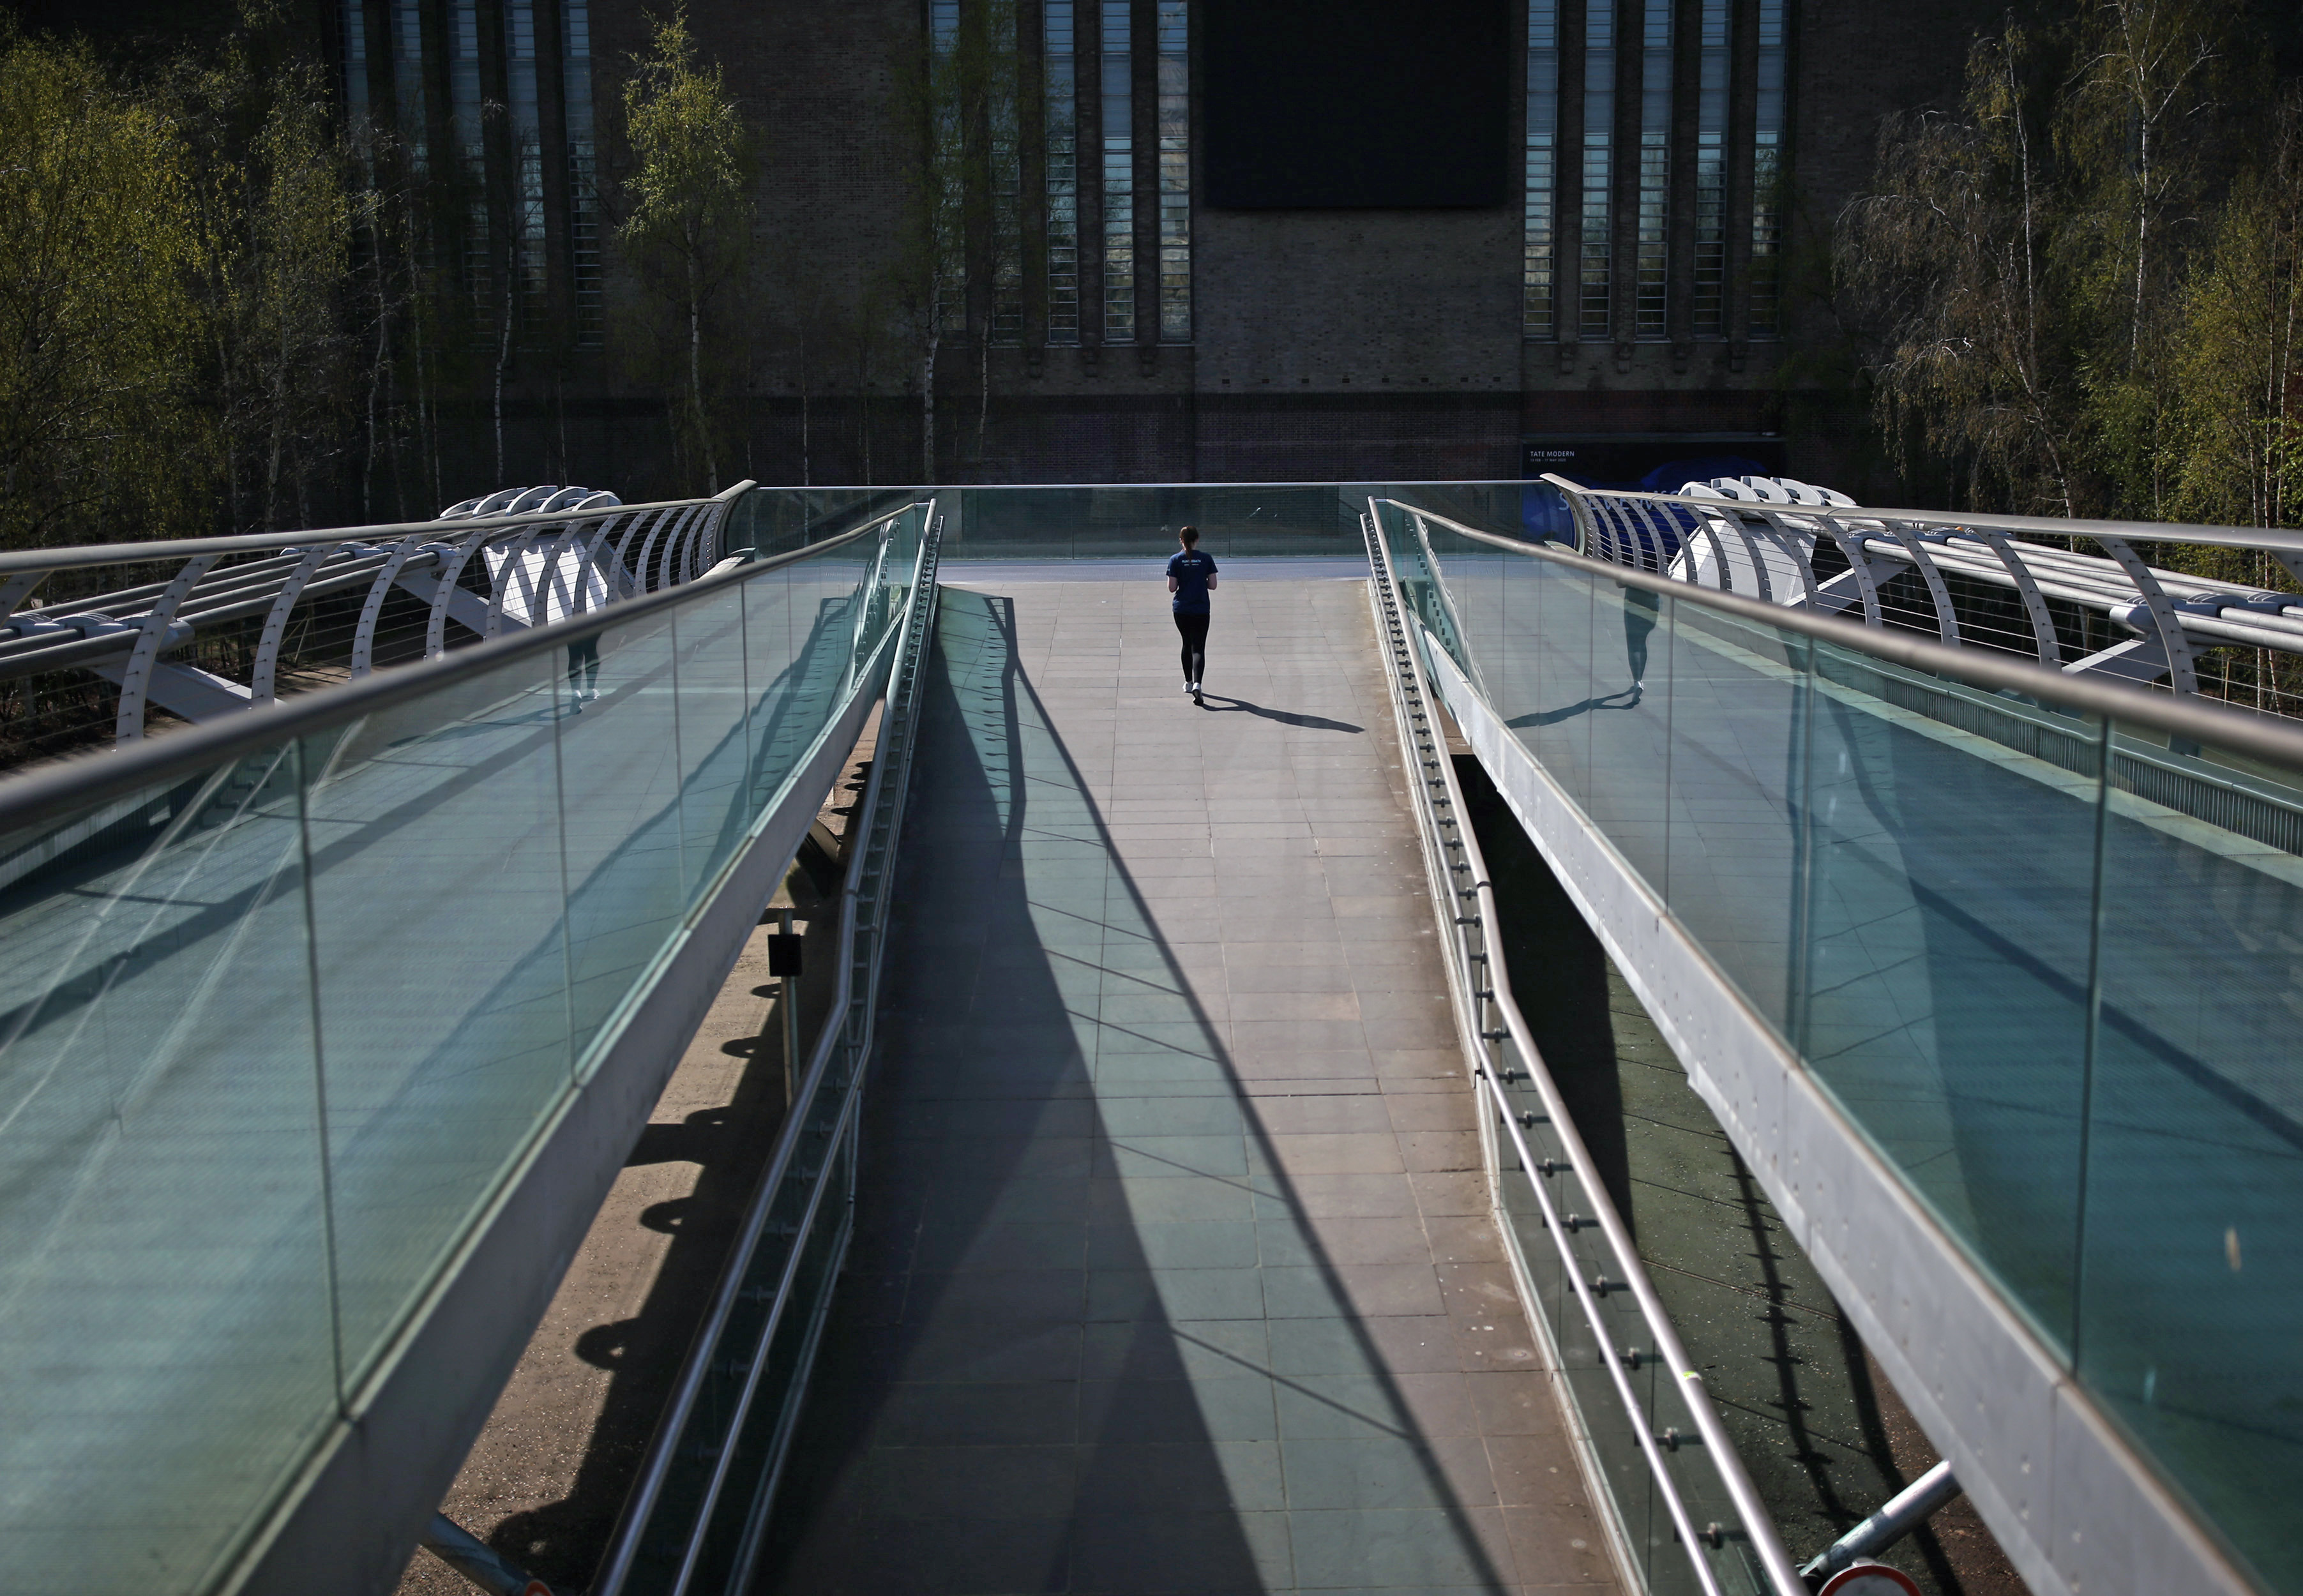 A woman jogging on the Millennium Bridge in London, as the UK continues in lockdown to help curb the spread of the coronavirus.